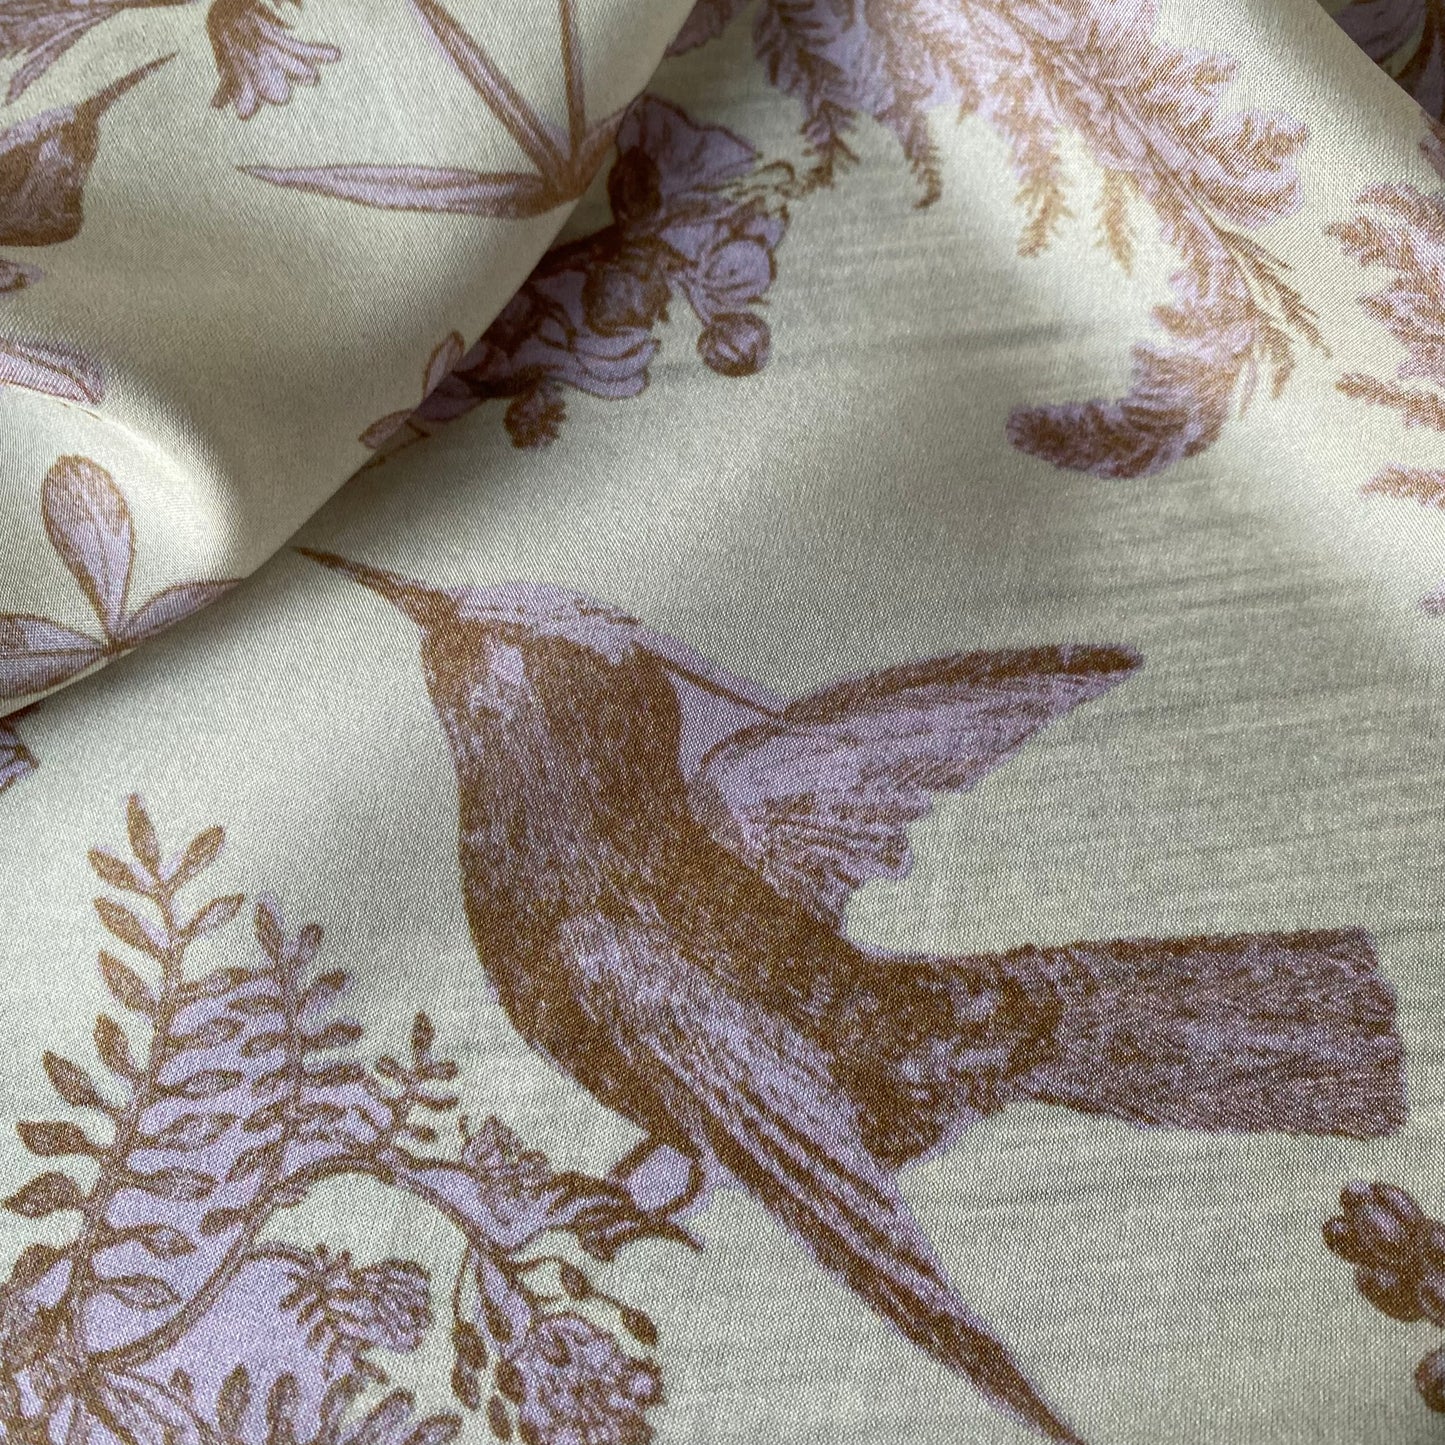 Hope Poem Silk Scarf Emily Dickinson in a Toile de Jouy Pattern, Pink, Brown, Beige Silk Literary Scarf Closeup of a Bird